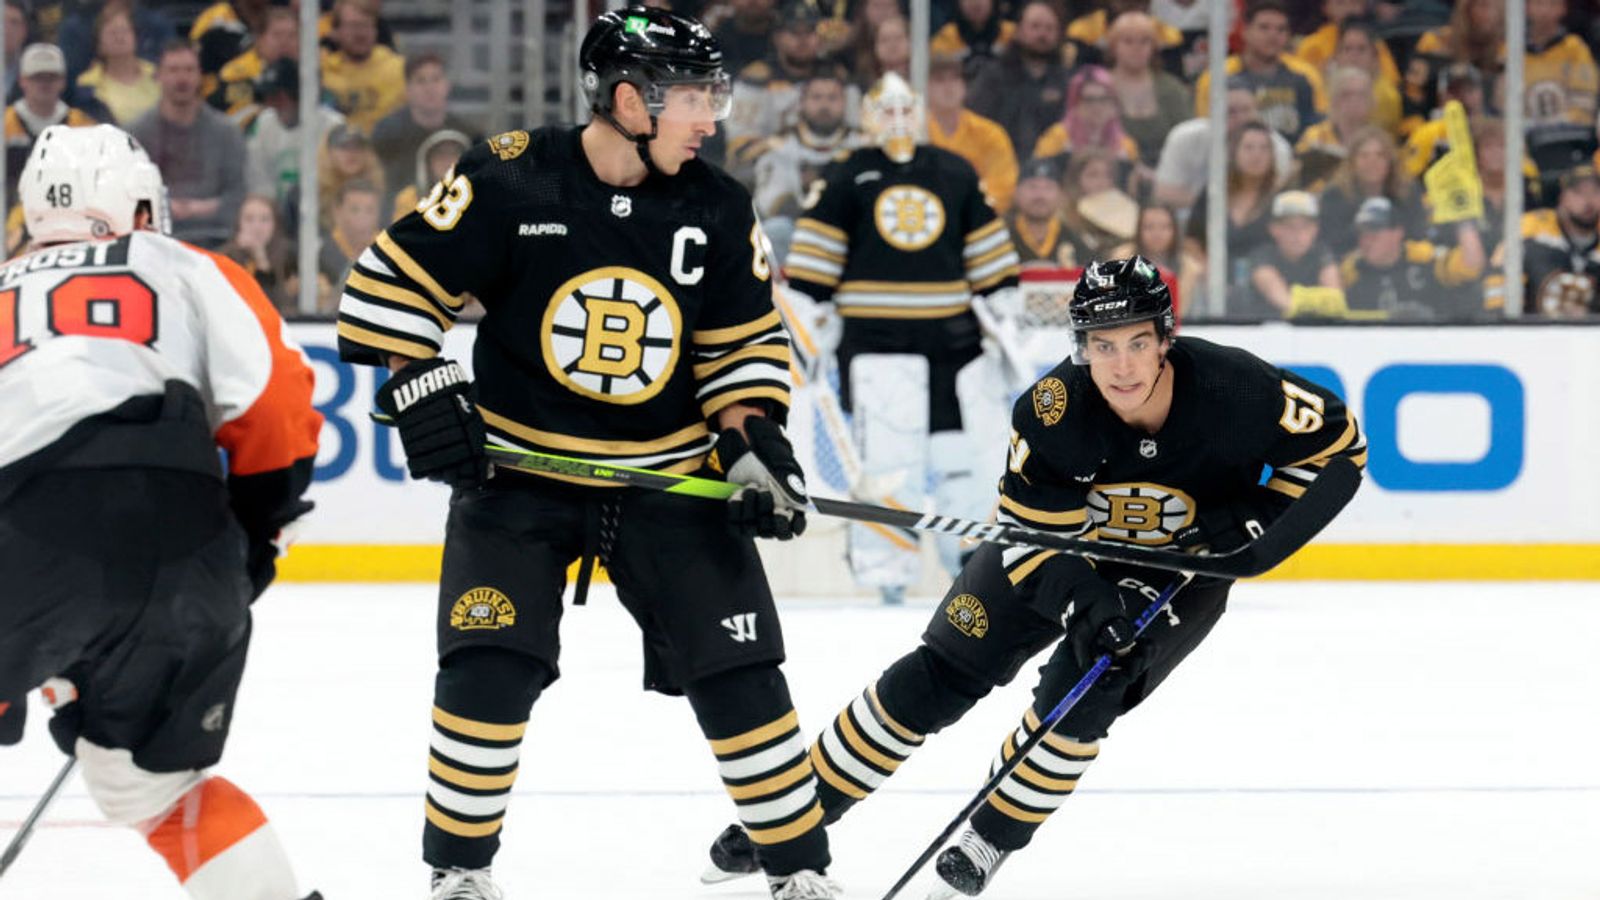 3 takeaways from the Bruins' win over the Rangers